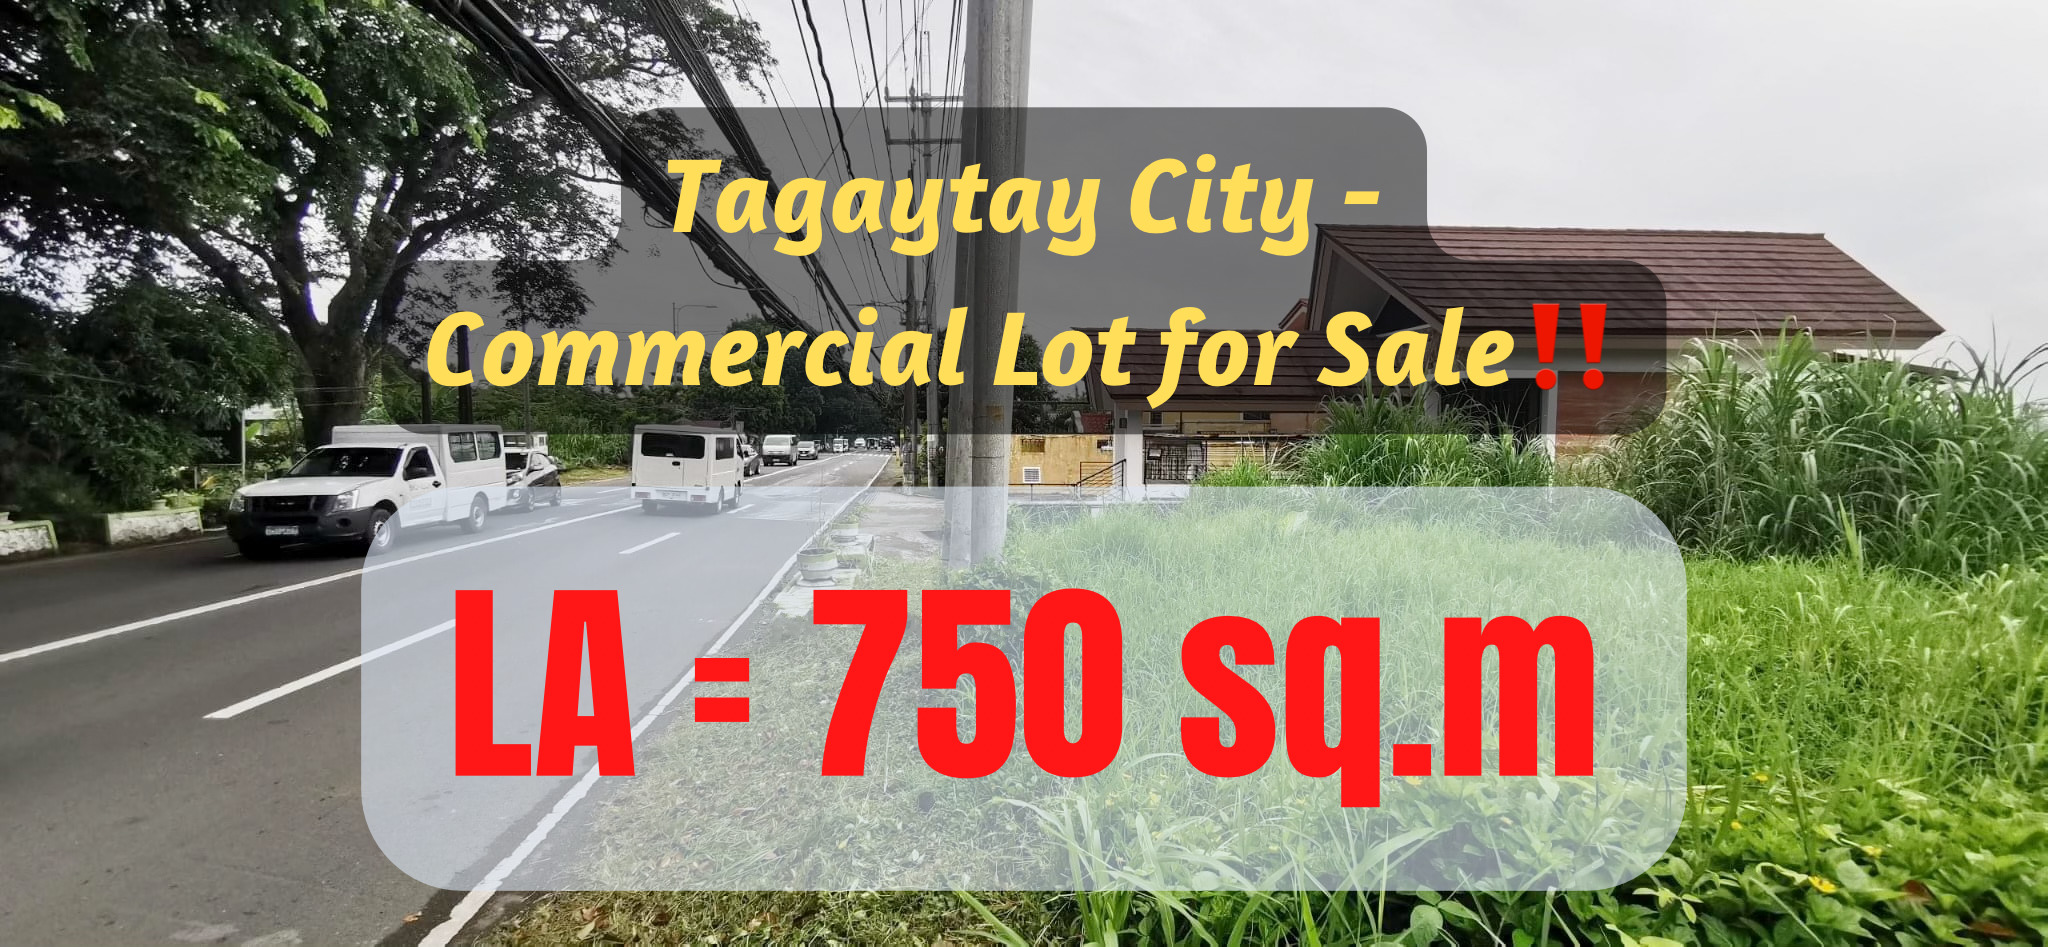 Tagaytay City – Commercial Lot for Sale‼️